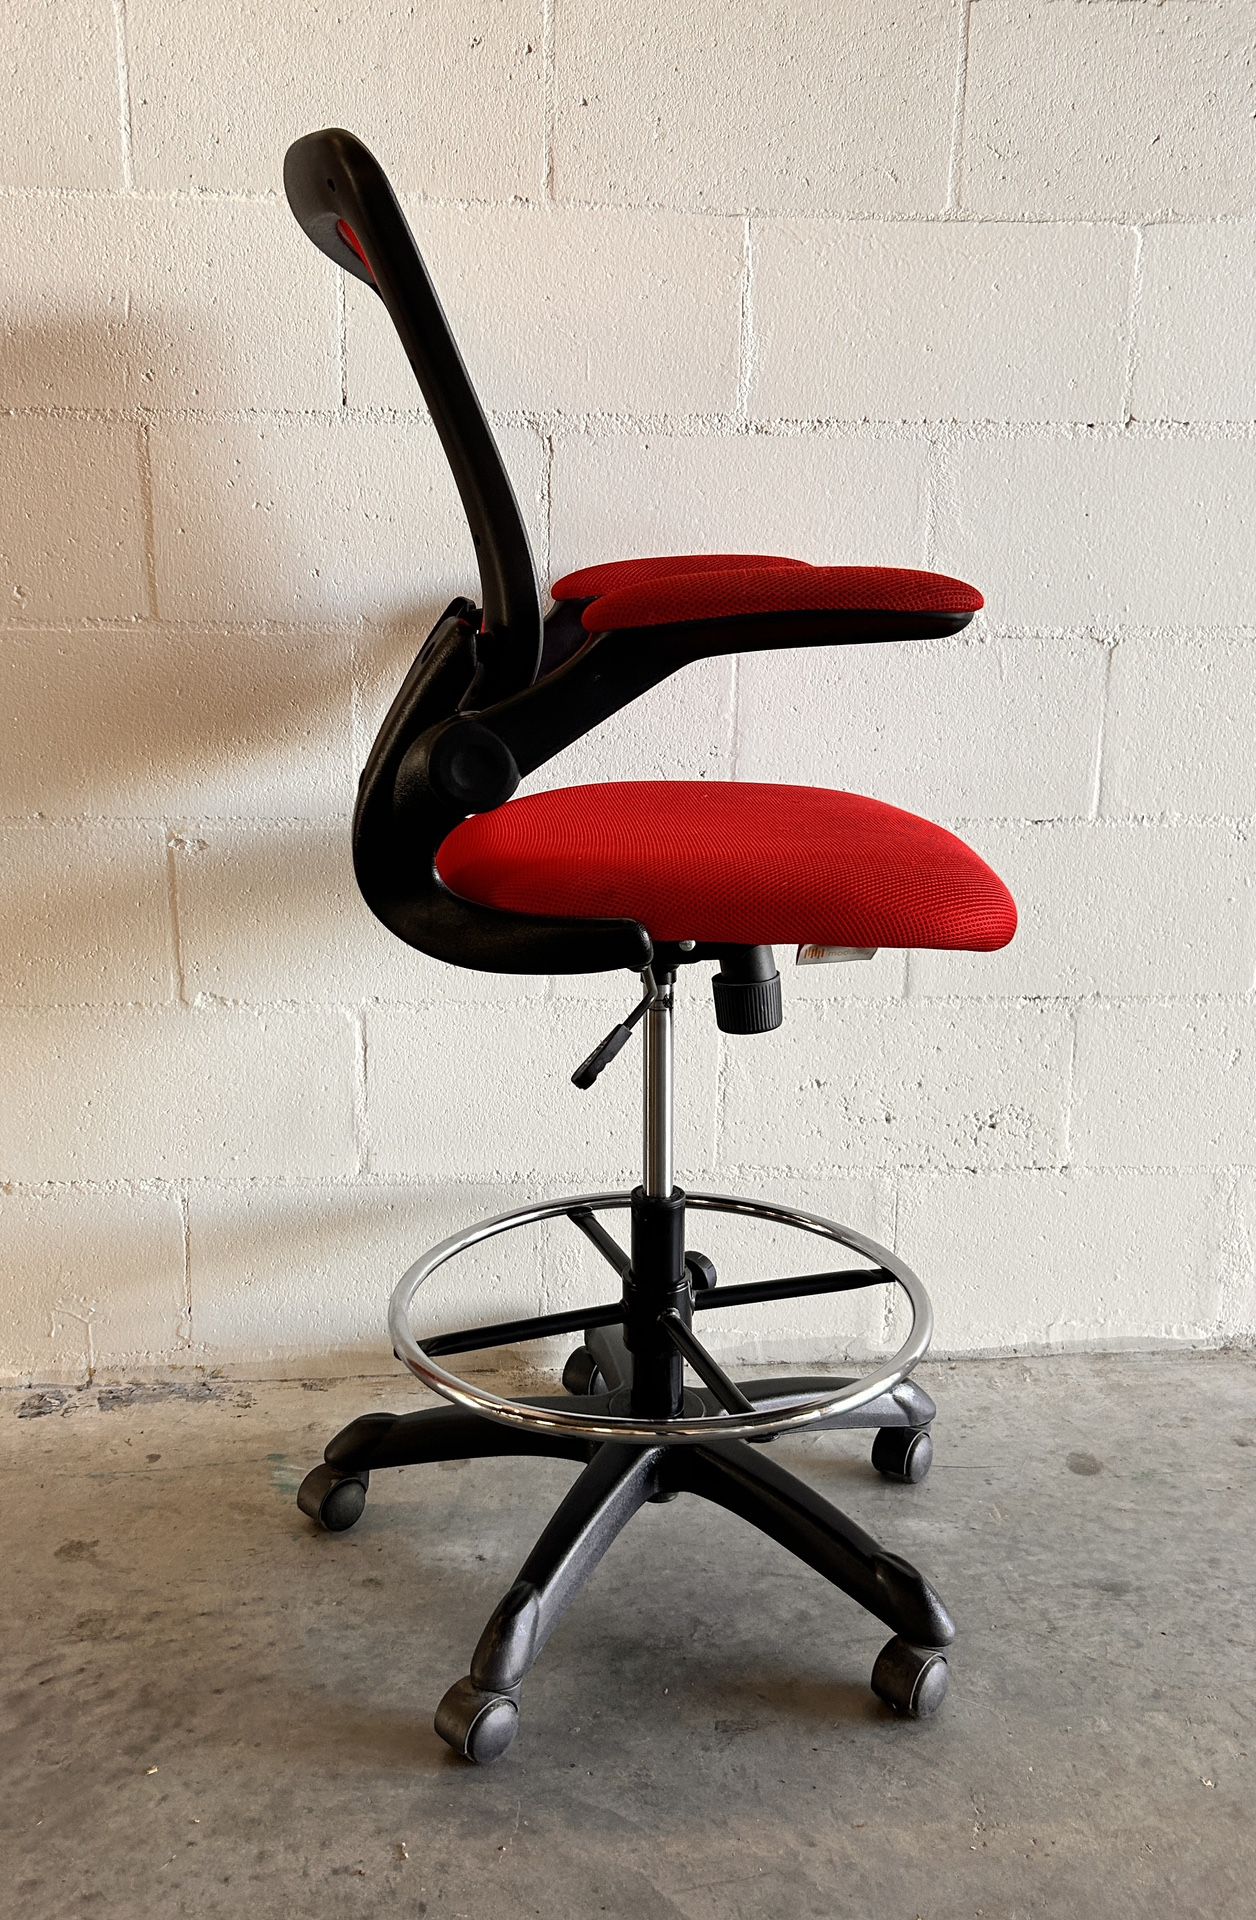 $60 for (1) Modway Drafting Stool in Red